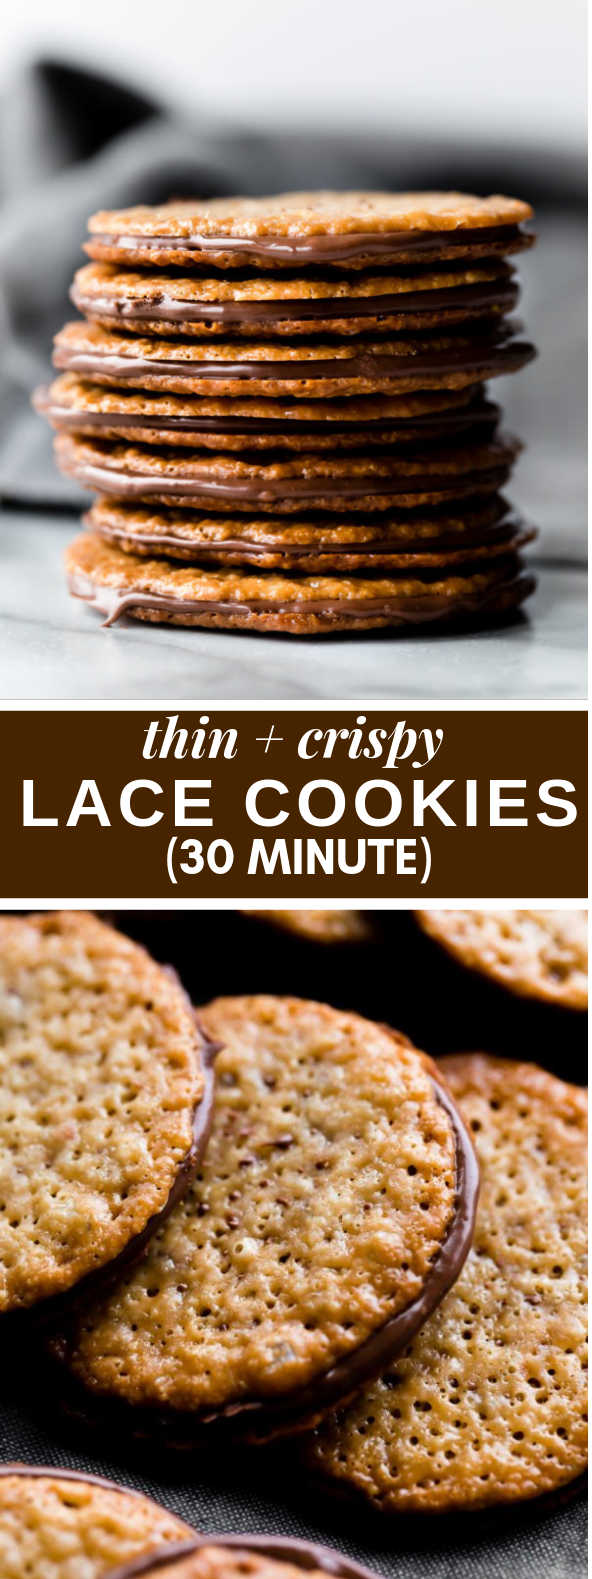 Easy Lace Cookies #dessert #chocolate